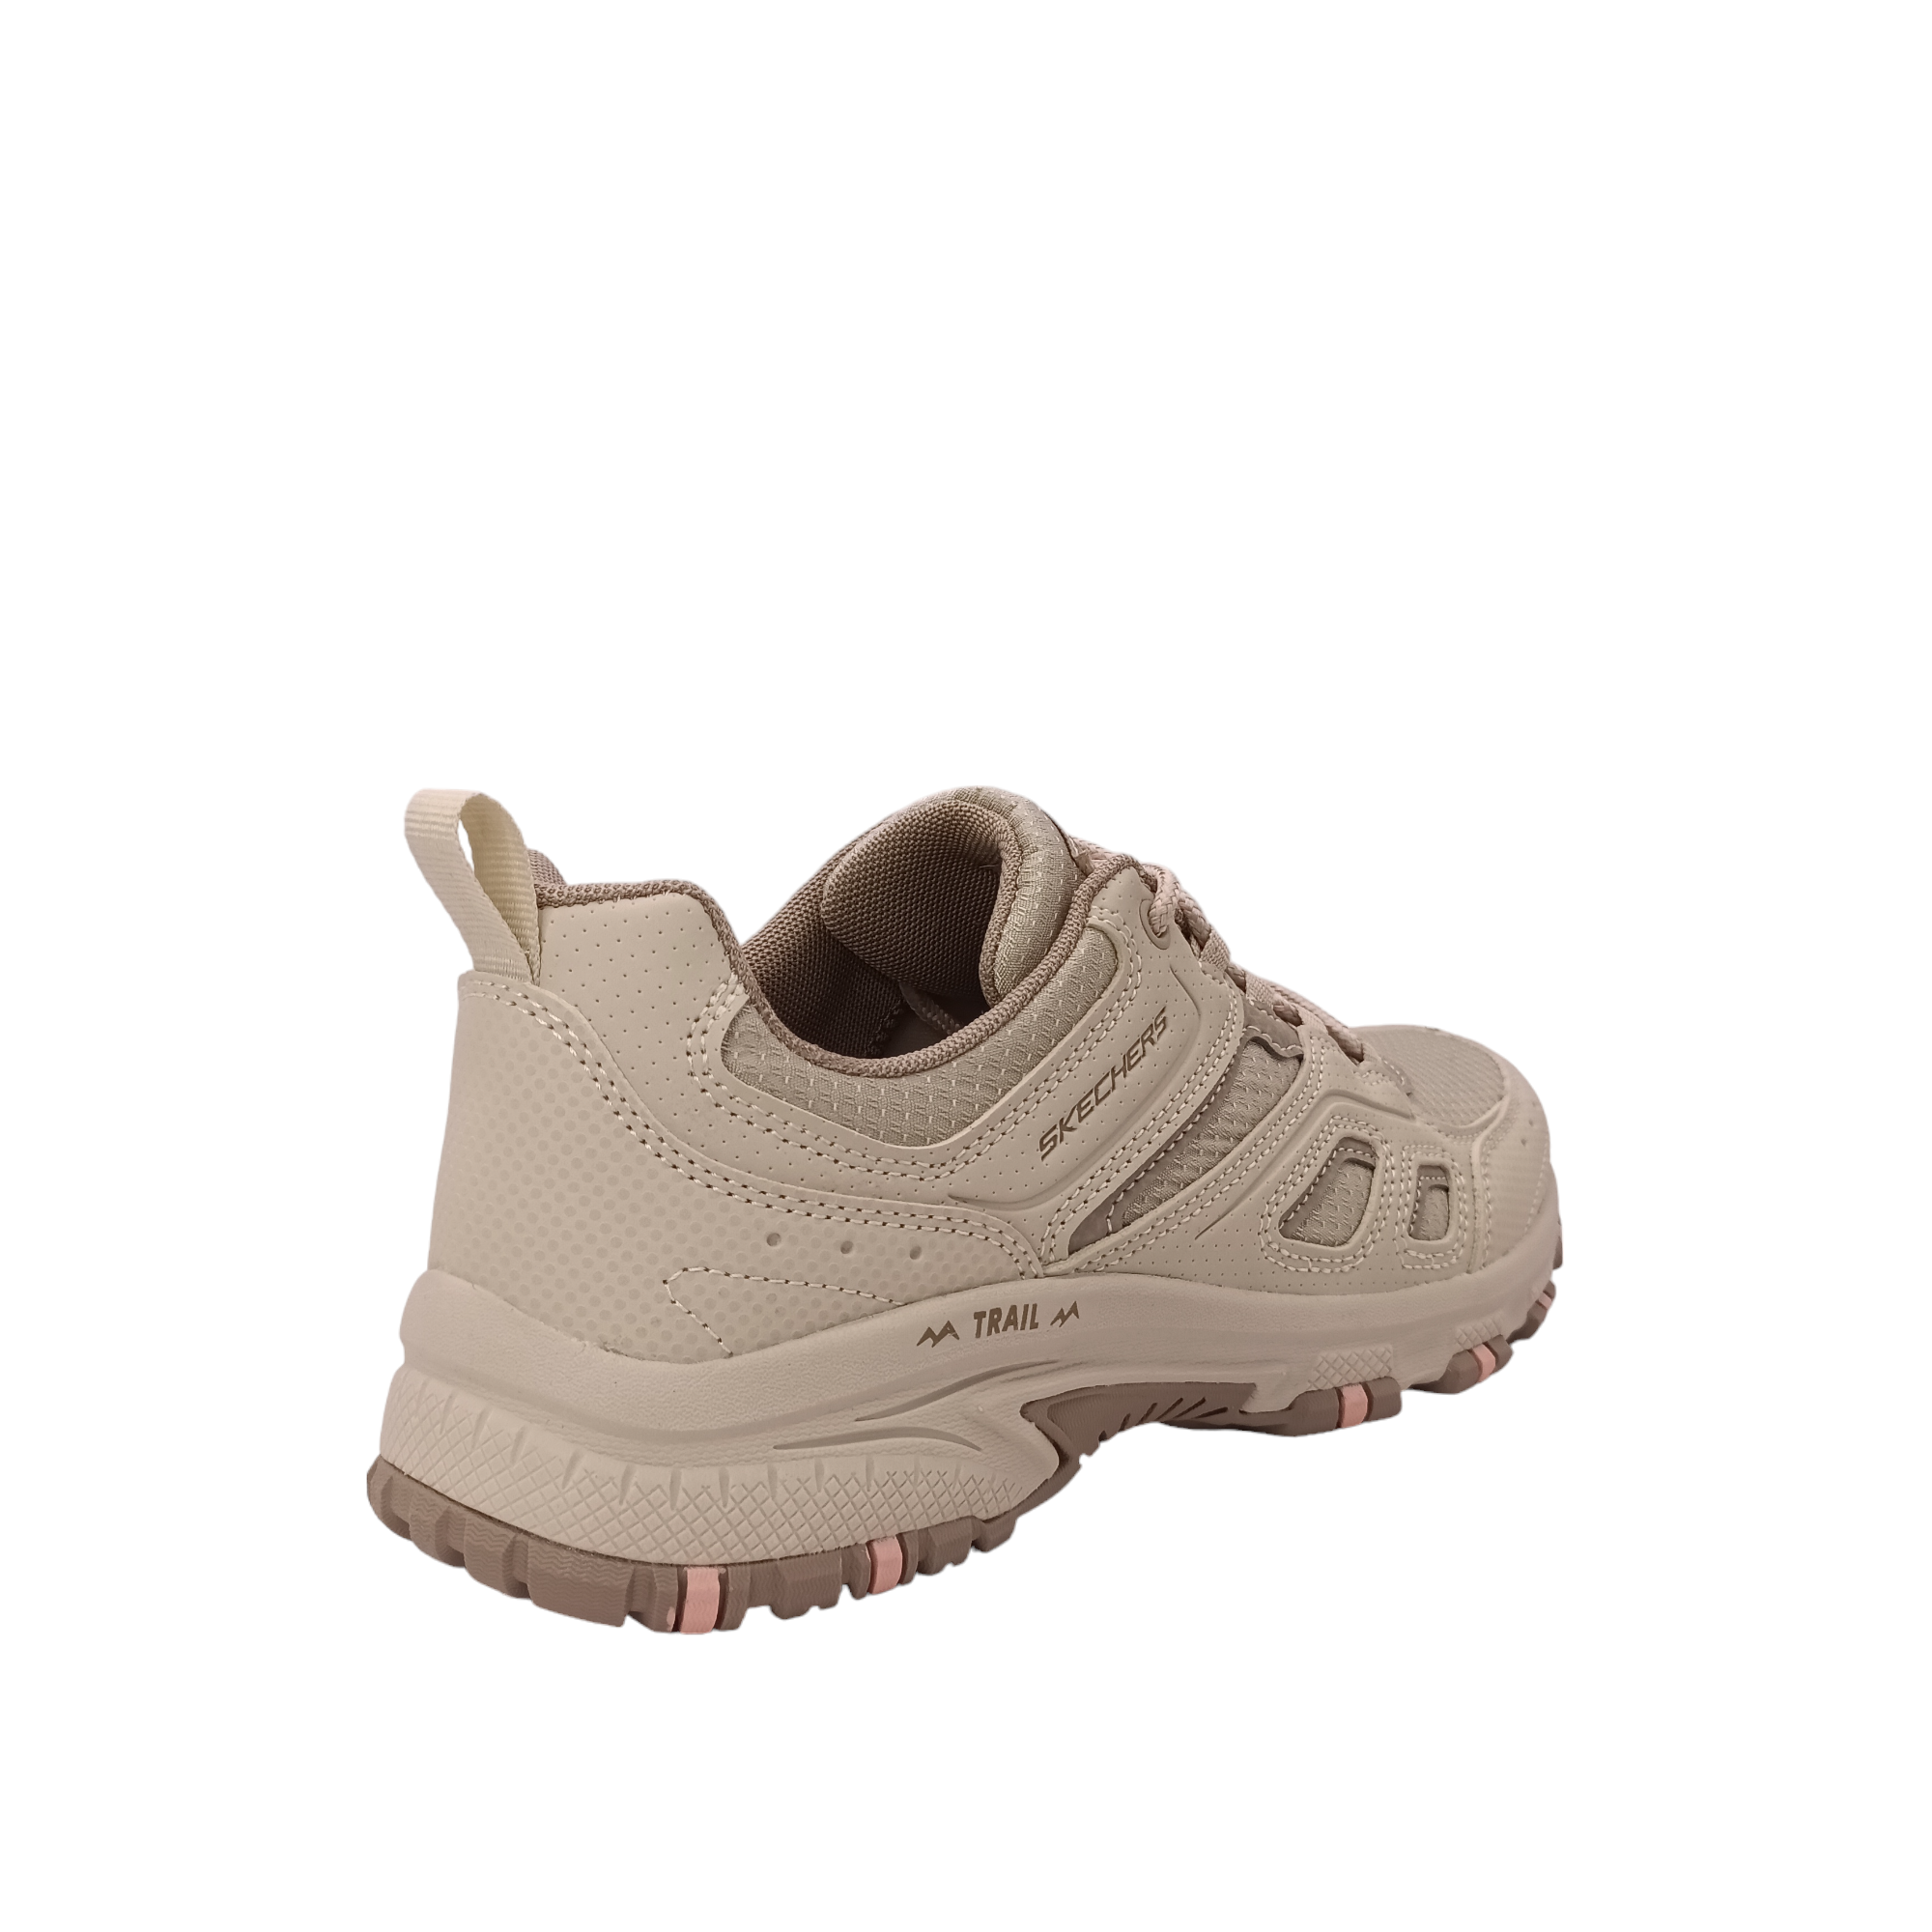 Shop Pathway Finder Skechers - with shoe&me - from Skechers - Sneakers - Sneakers, Winter, Womens - [collection]